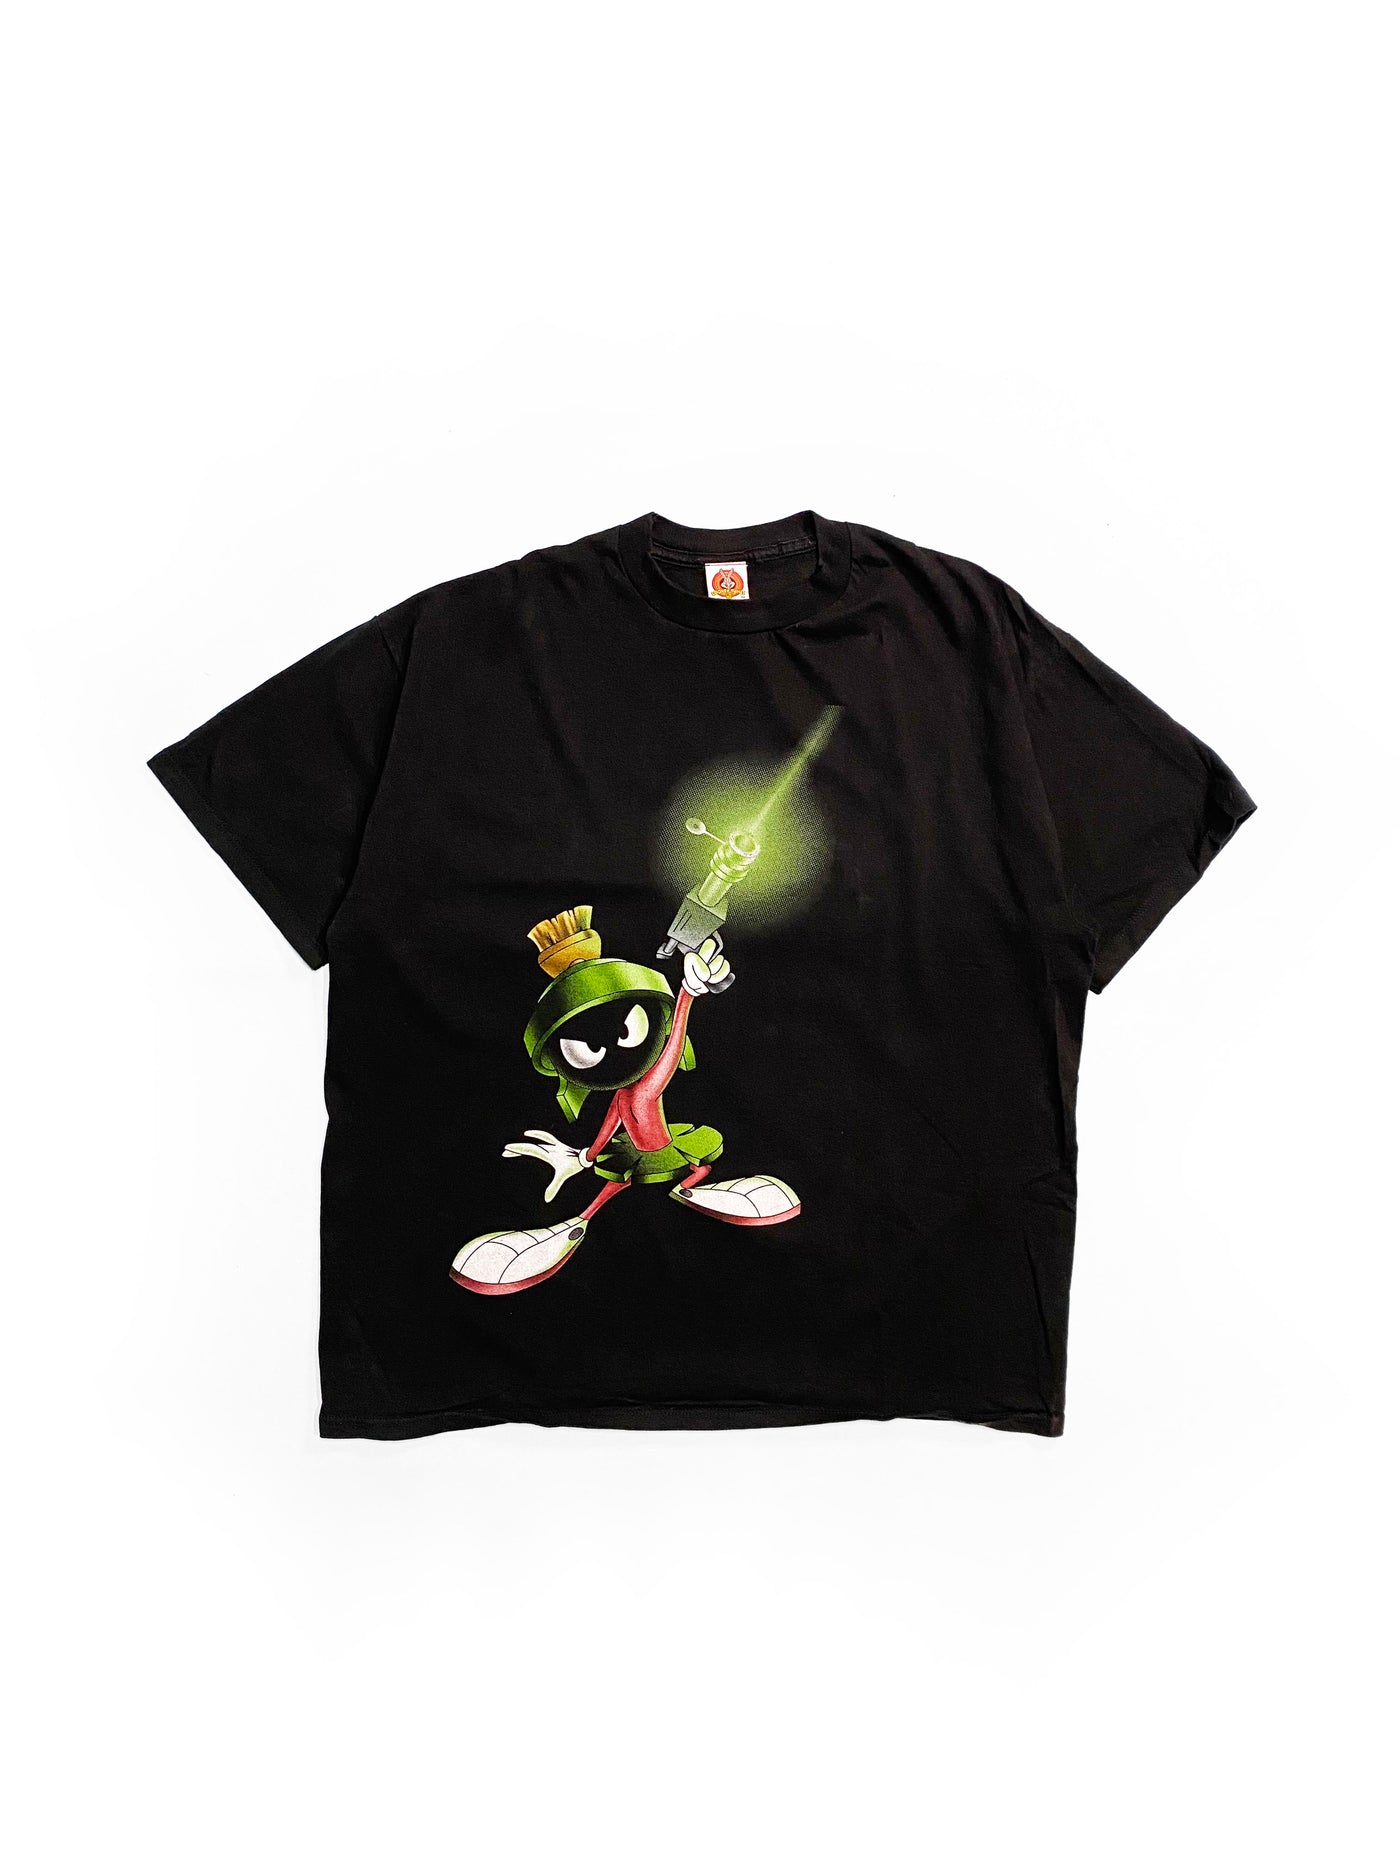 Vintage 1997 Looney Tunes Marvin the Martian T-Shirt